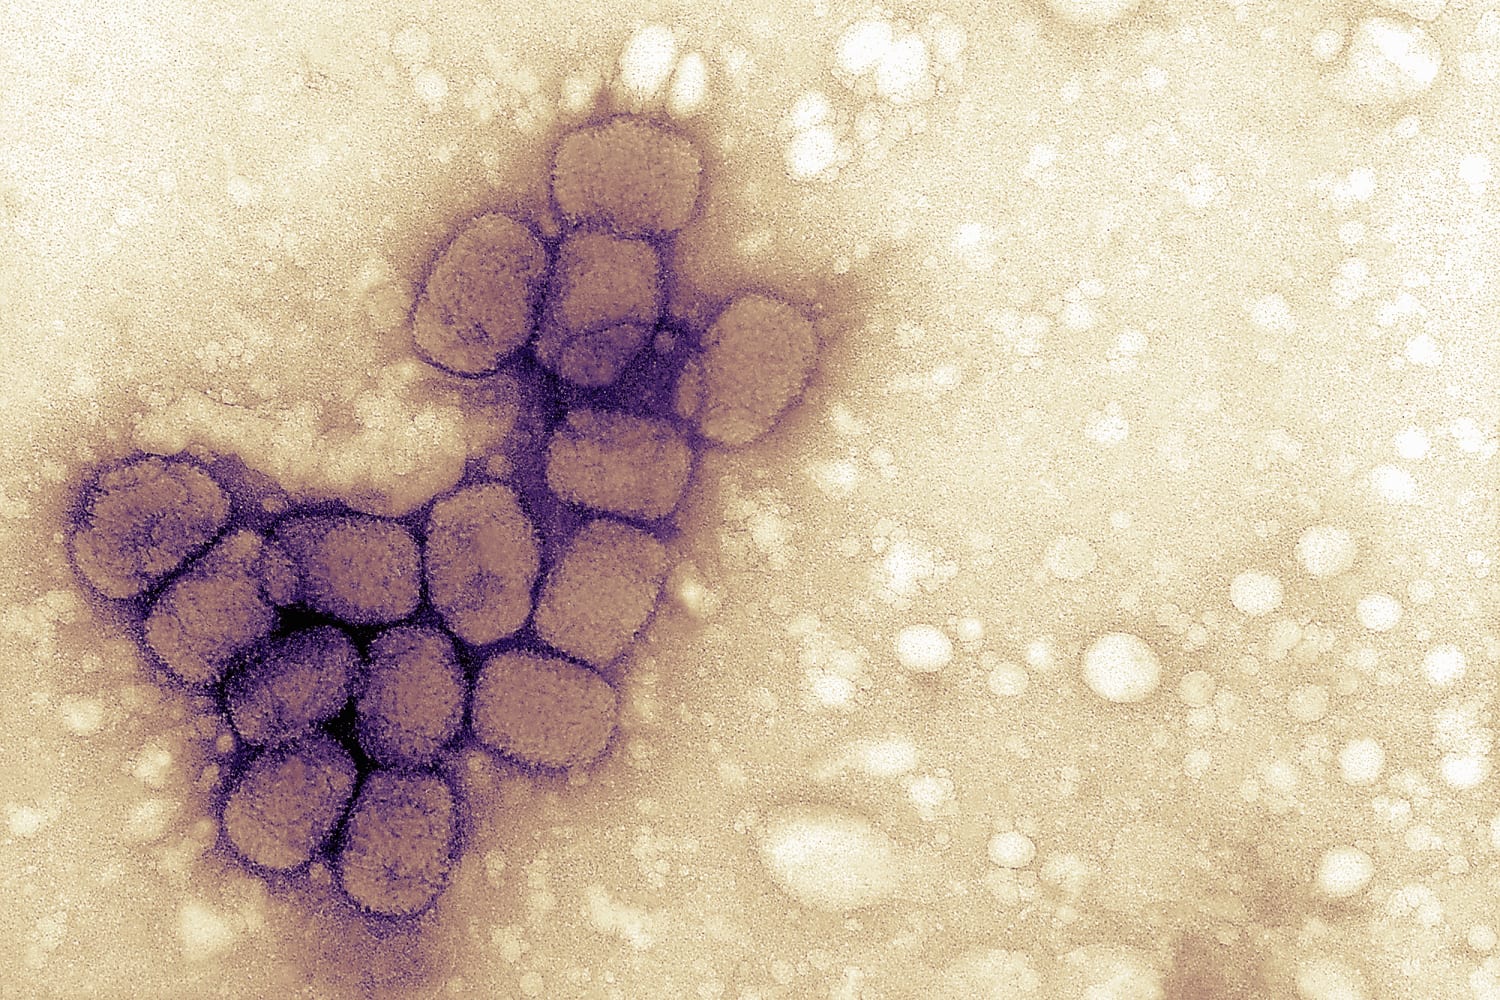 Vials found in Pennsylvania lab did not contain smallpox as labeled, CDC says